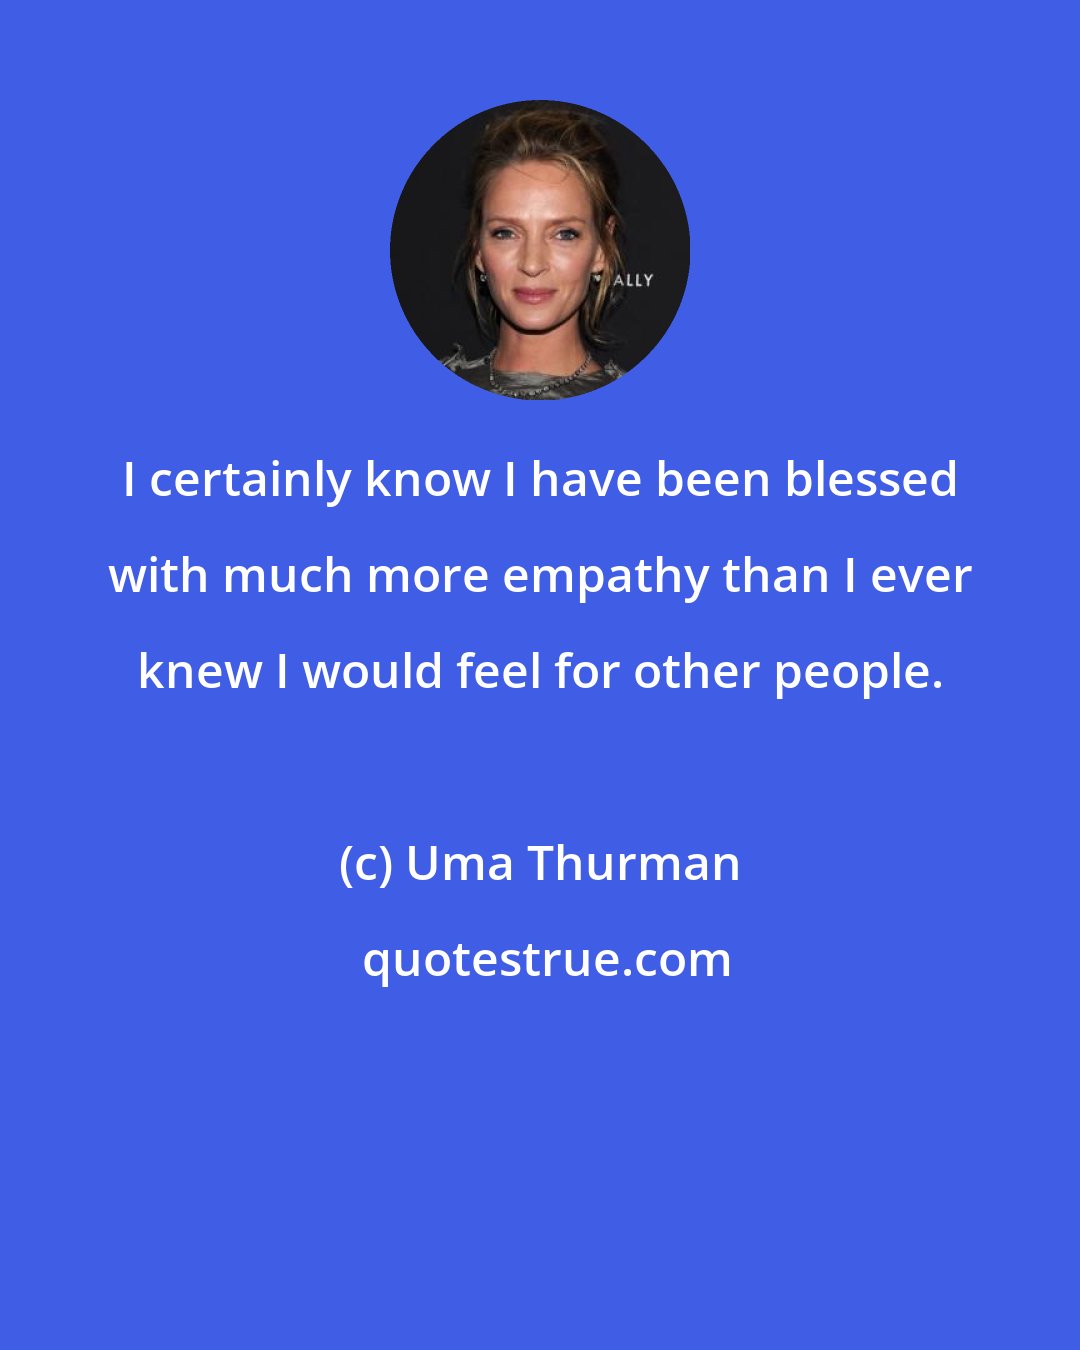 Uma Thurman: I certainly know I have been blessed with much more empathy than I ever knew I would feel for other people.